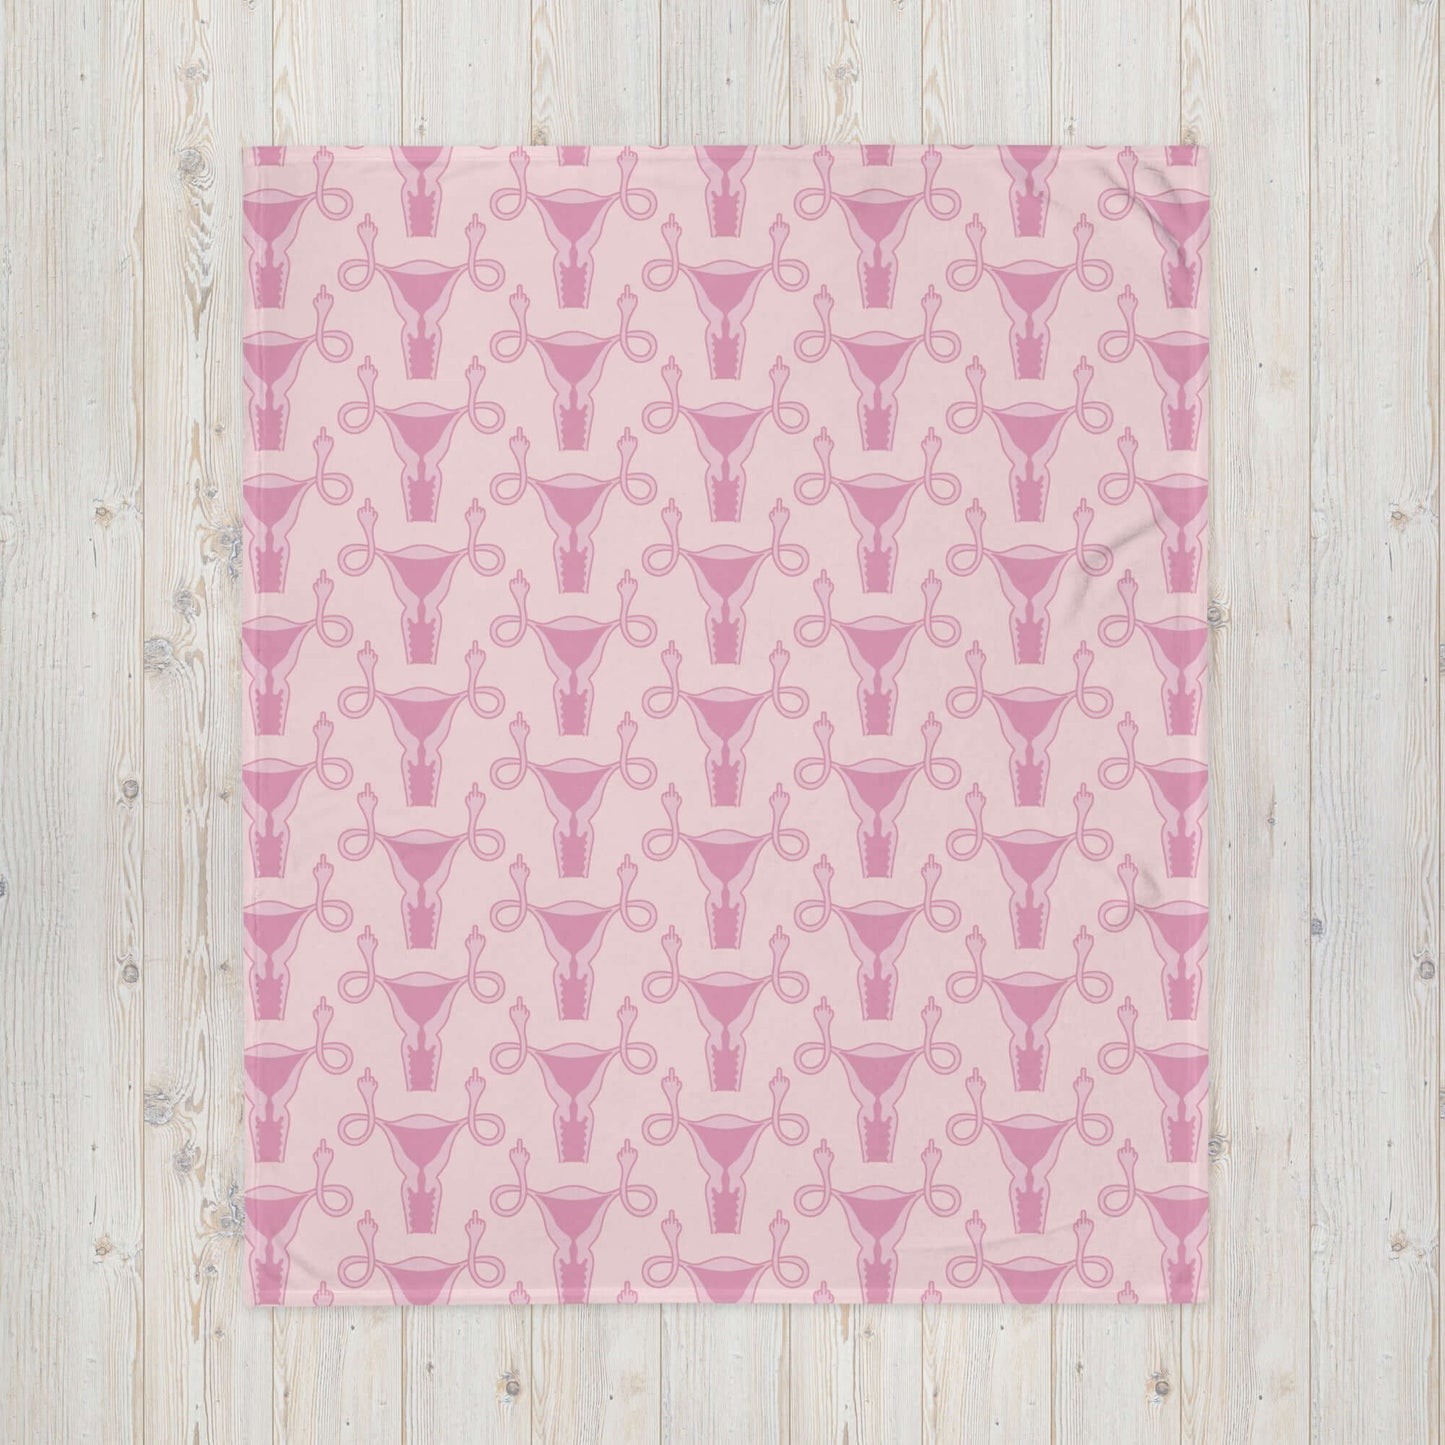 Pink fleece throw blanket with pink uterus flipping middle finger graphic printed all over by witticisms r us dot com